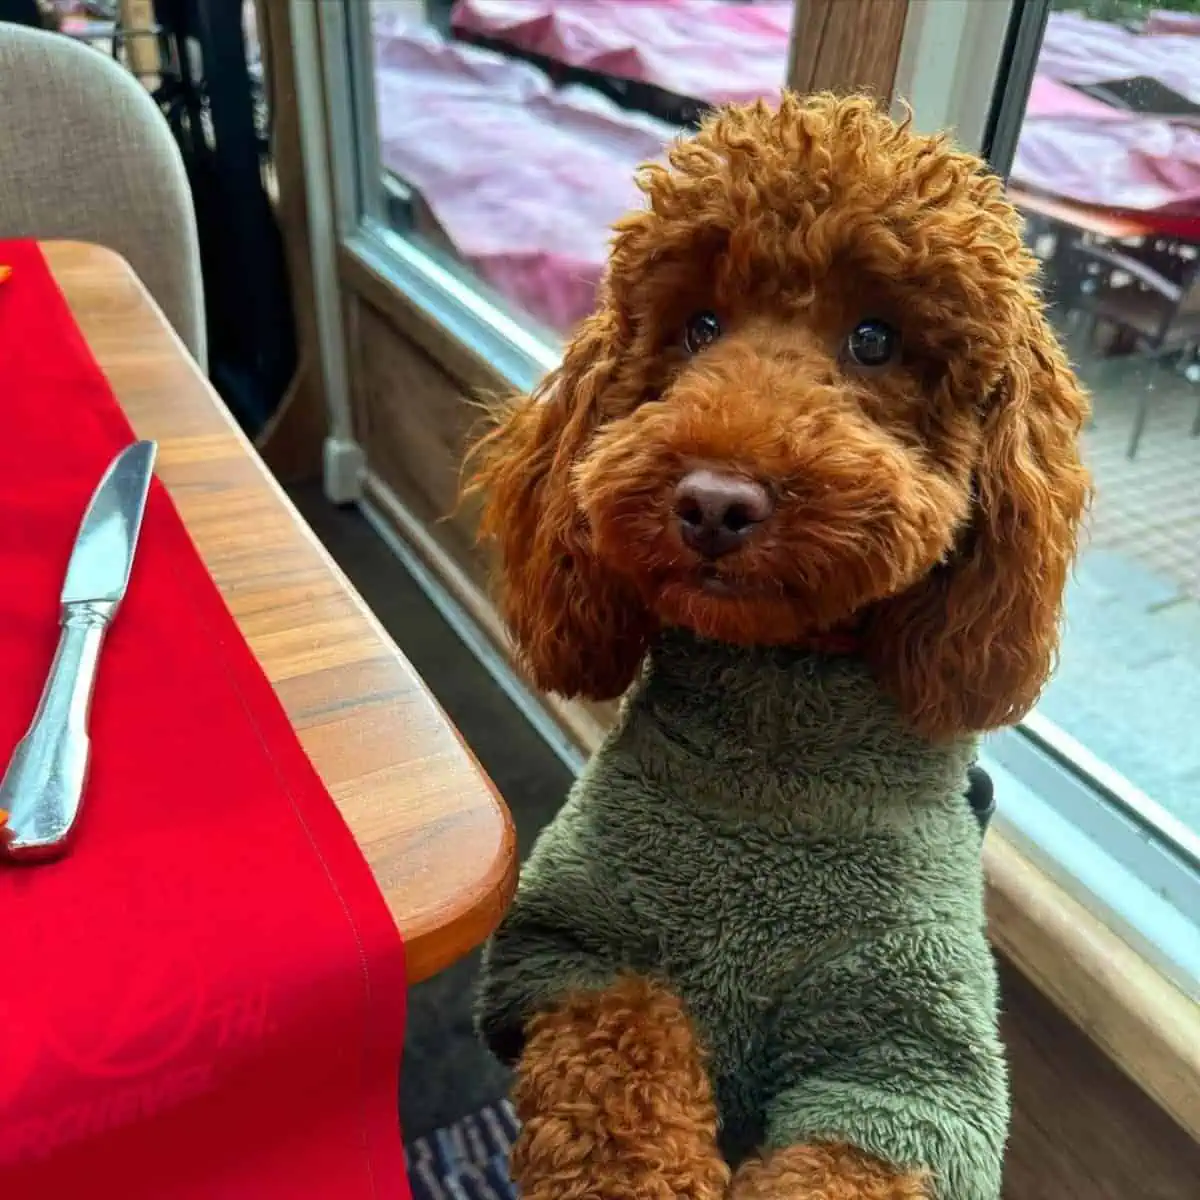 Toy Poodle at a restaurant